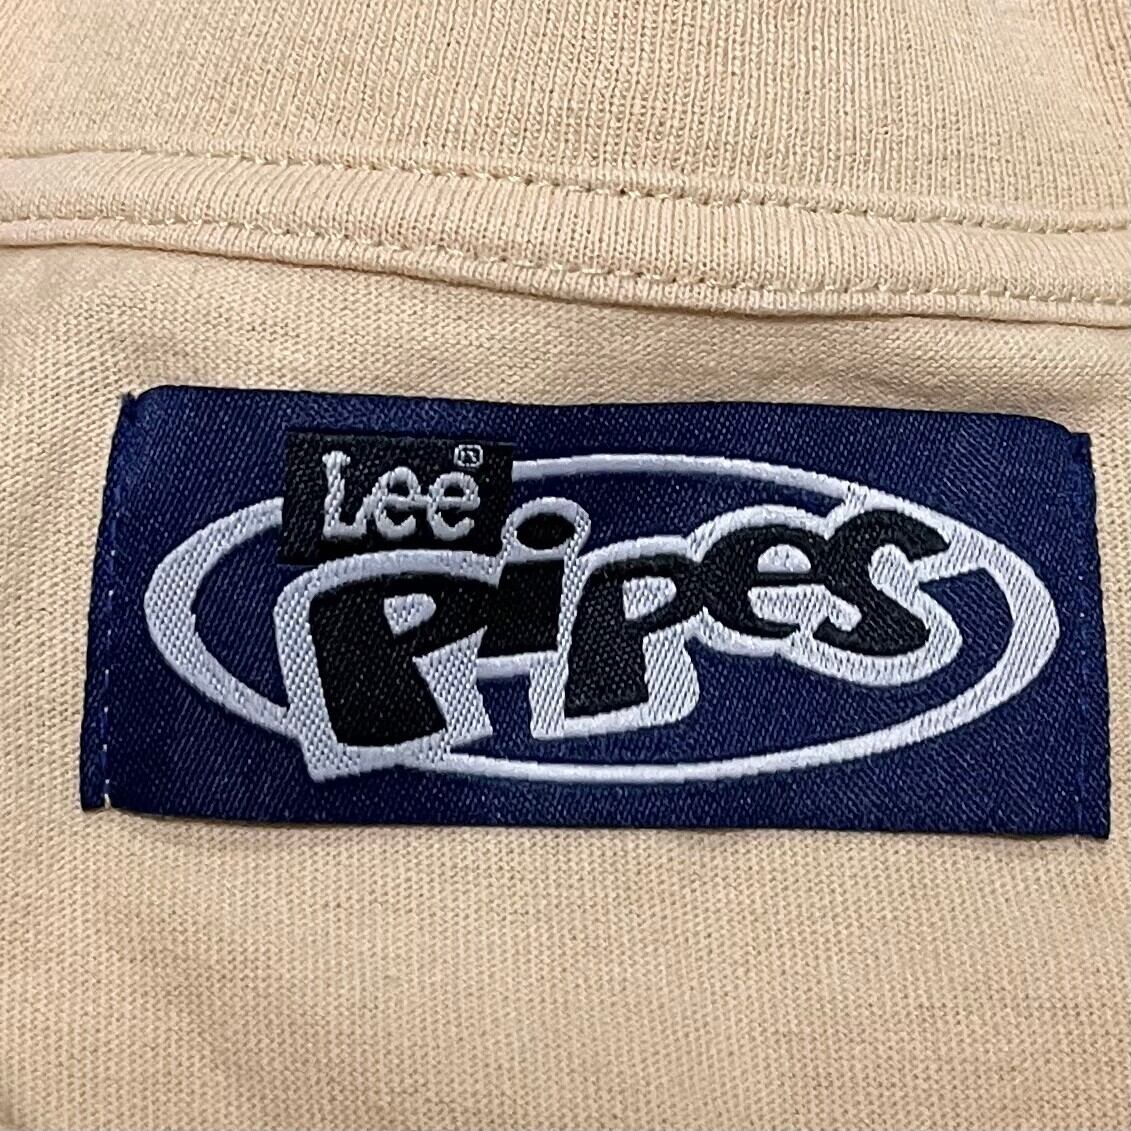 【size M】Lee Pipes リー　パイプス　Tシャツ